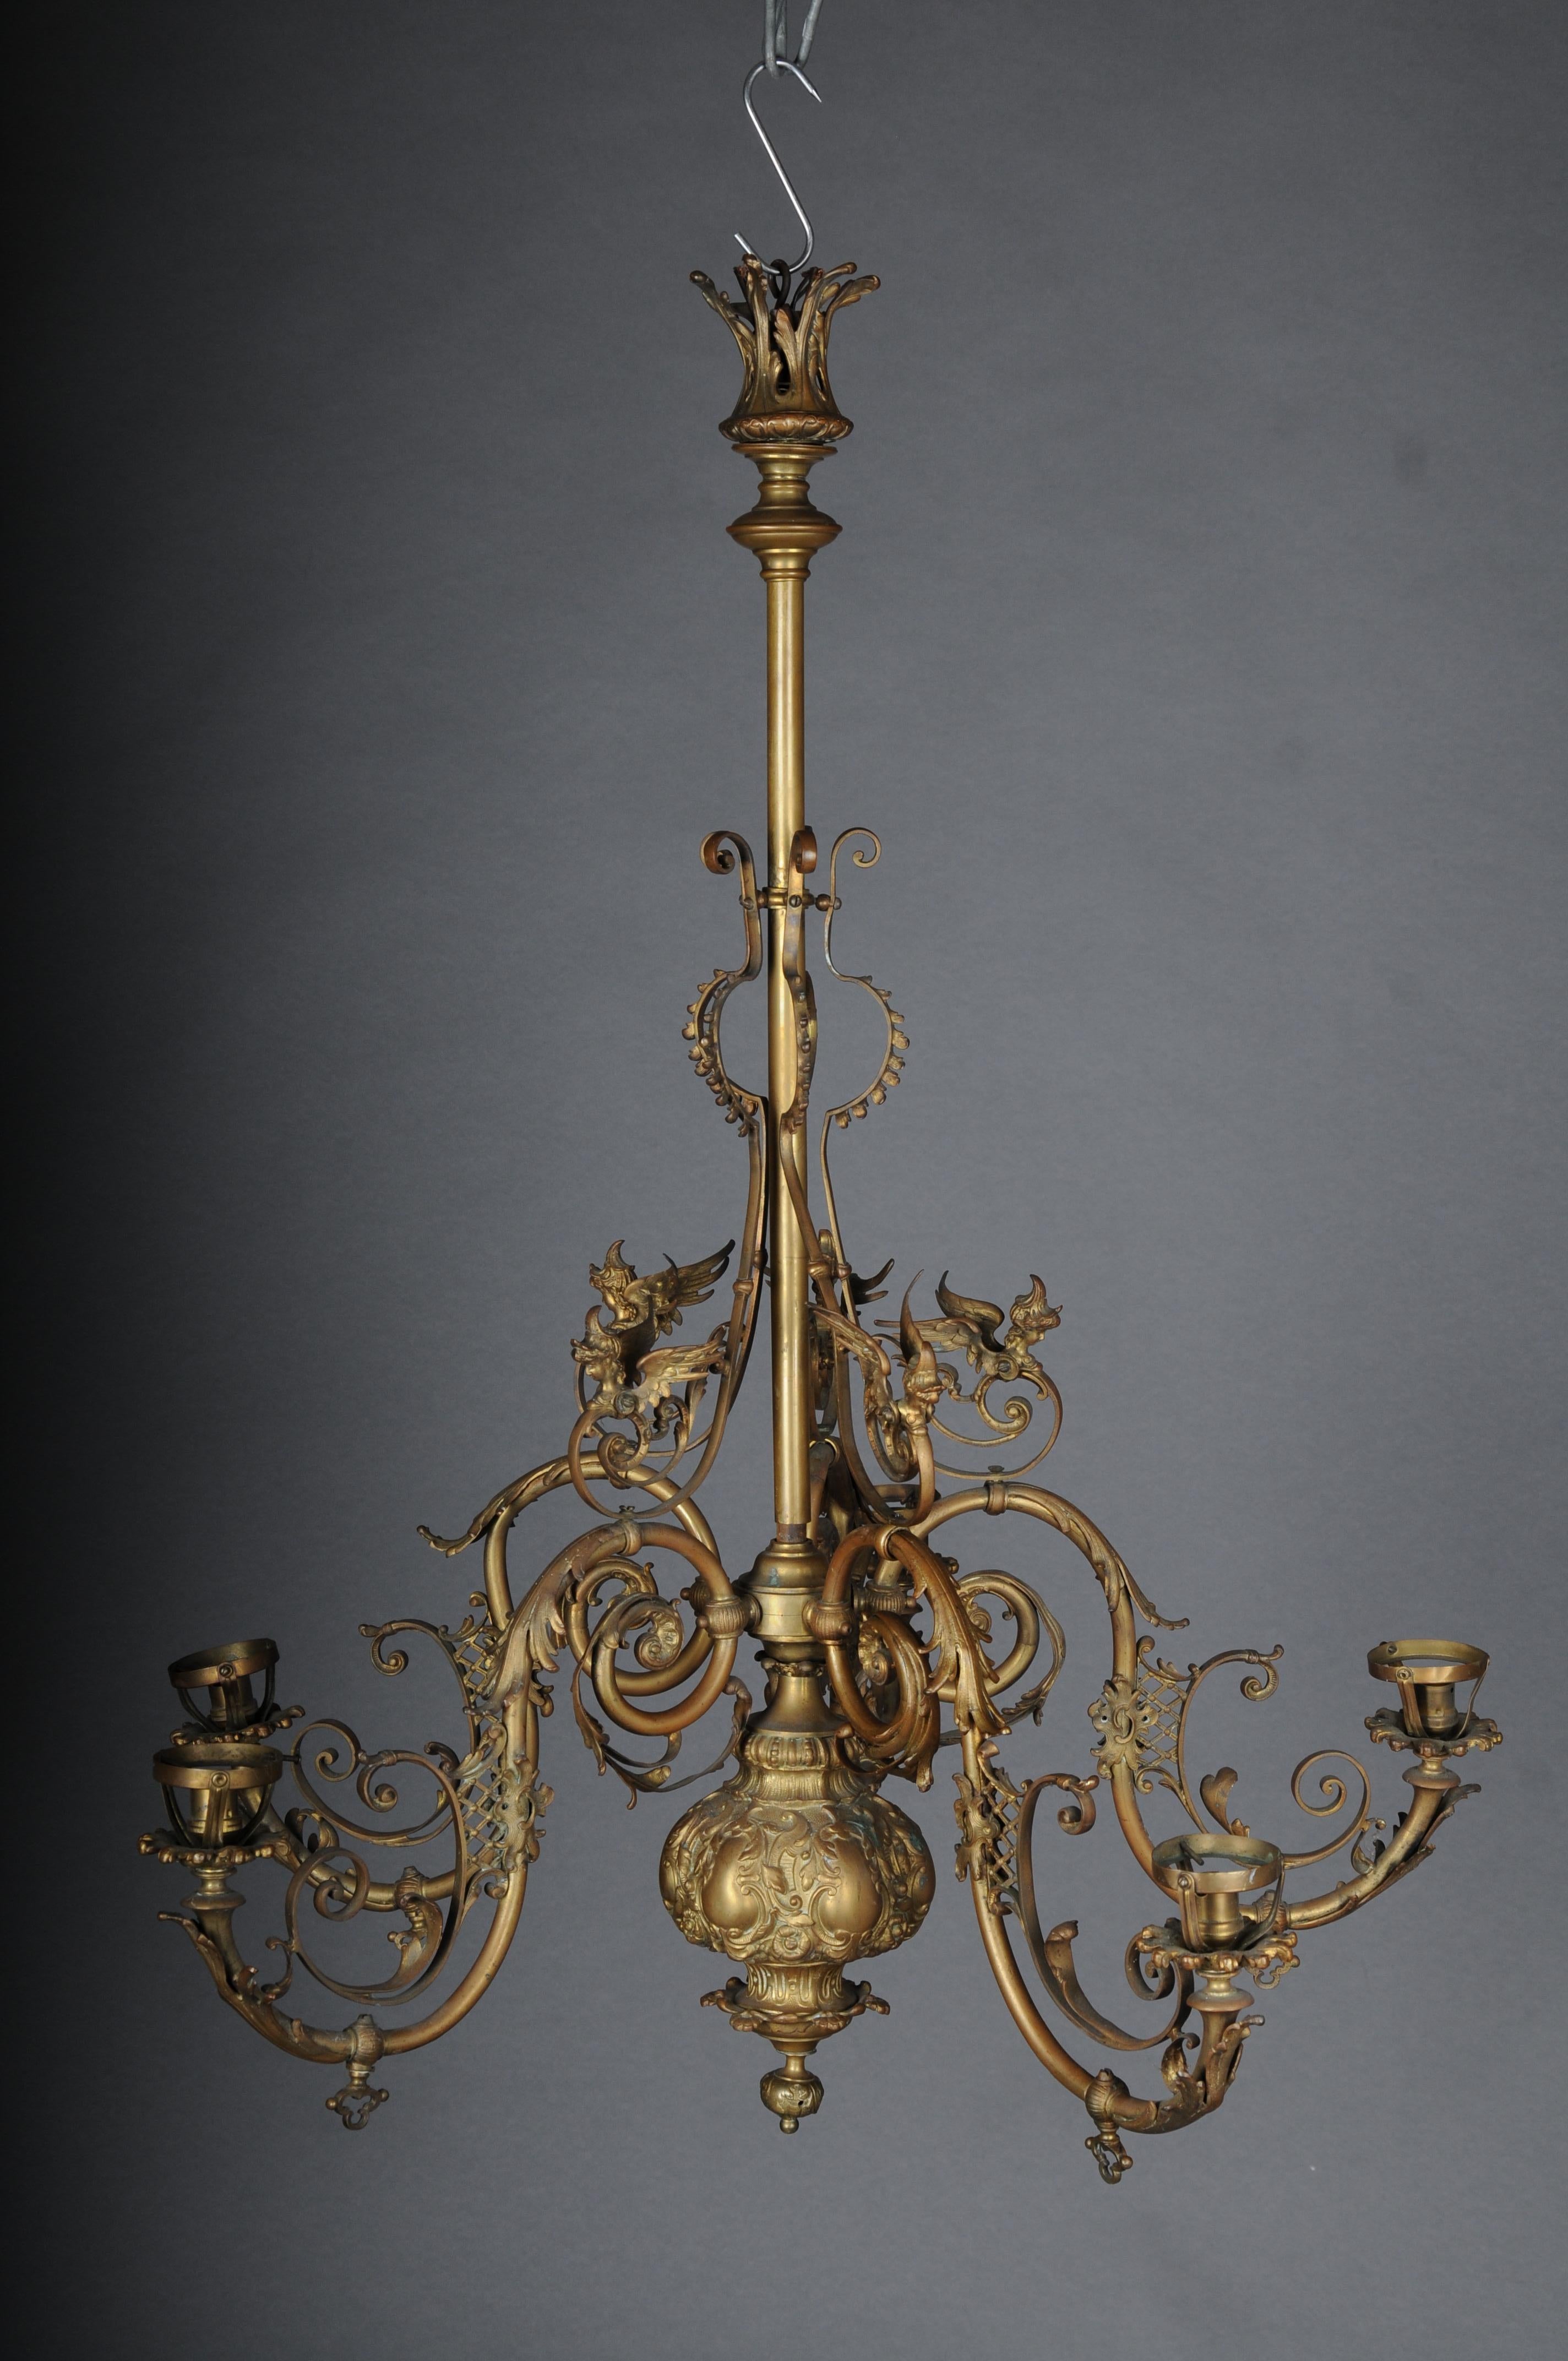 Antique magnificent chandelier, bronze, gold around 1860.

Voluminous body with curved light arms. 4 light arms.